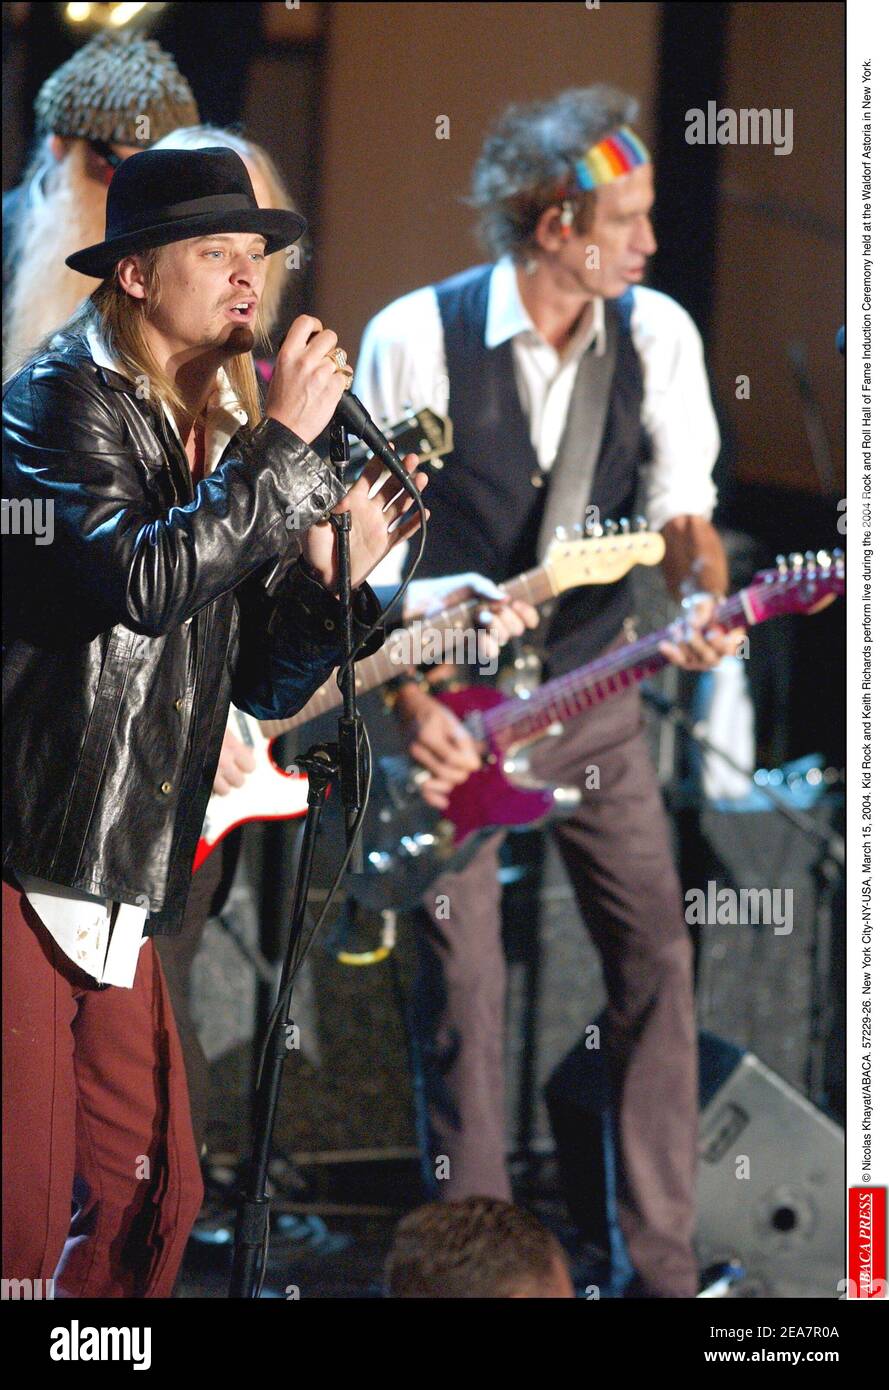 Kid Rock and Keith Richards perform live during the 2004 Rock and Roll Hall of Fame Induction Ceremony held at the Waldorf Astoria in New York, on Monday, March 15, 2004. (Pictured : Kid Rock, Keith Richards). Photo by Nicolas Khayat/ABACA. Stock Photo